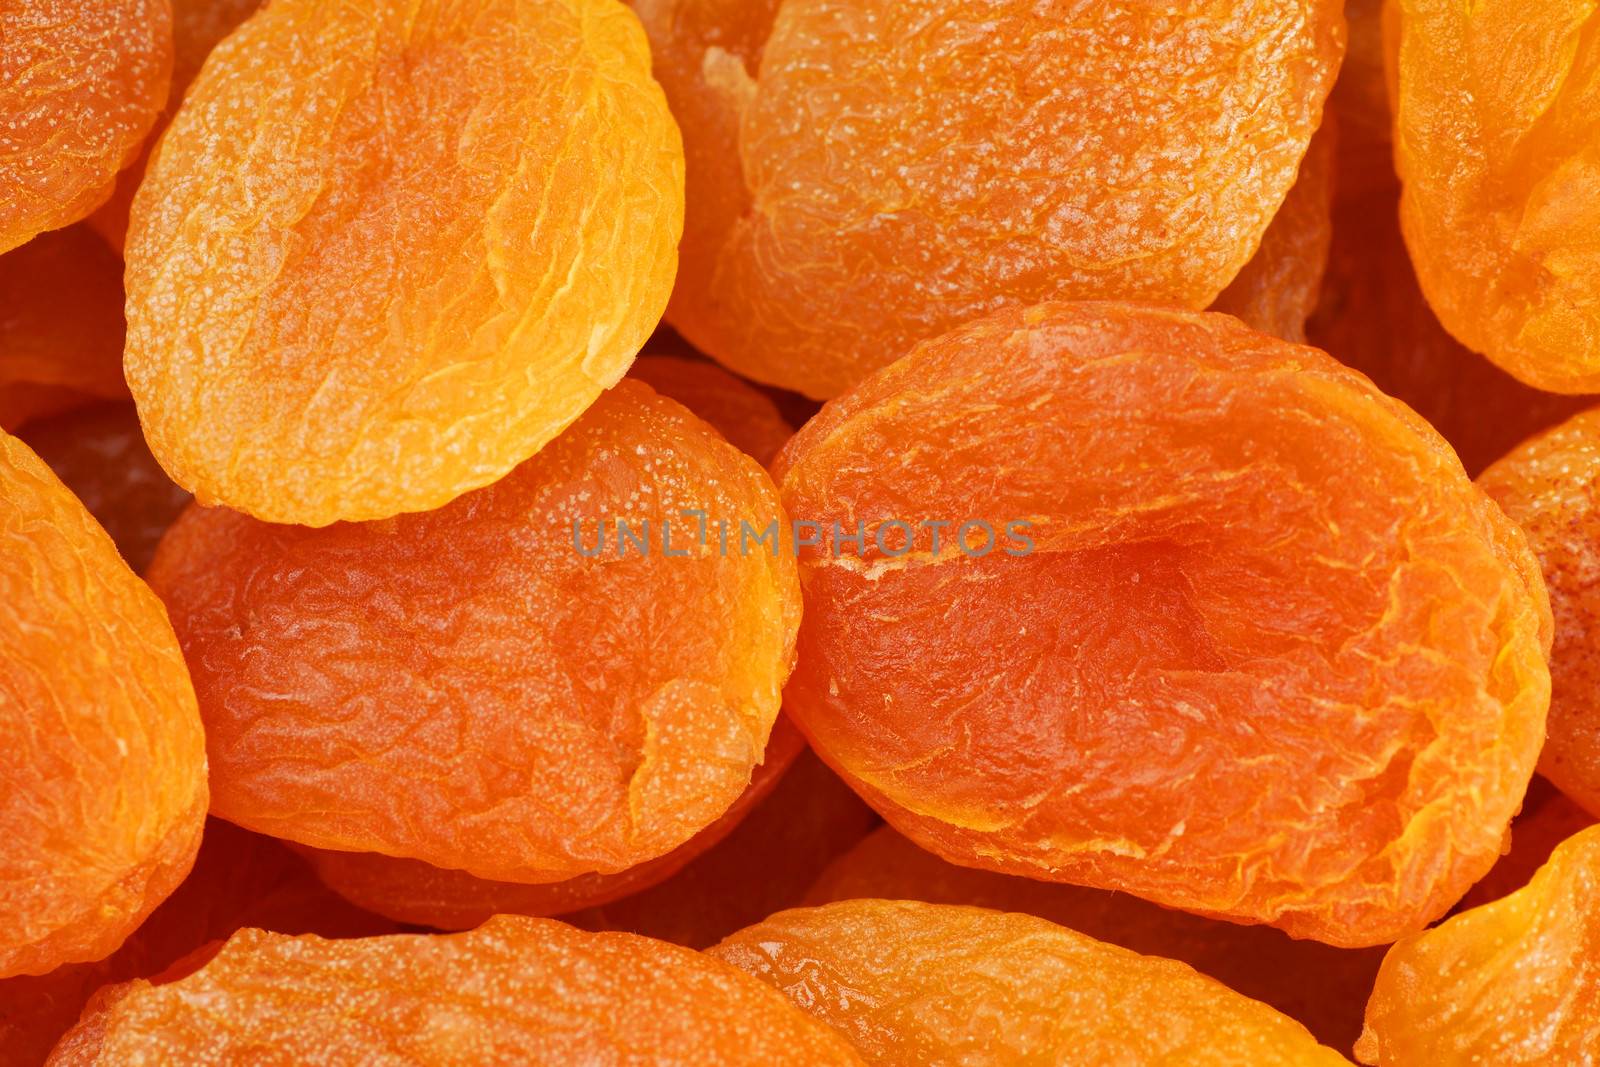 Dried apricot background by Mirage3